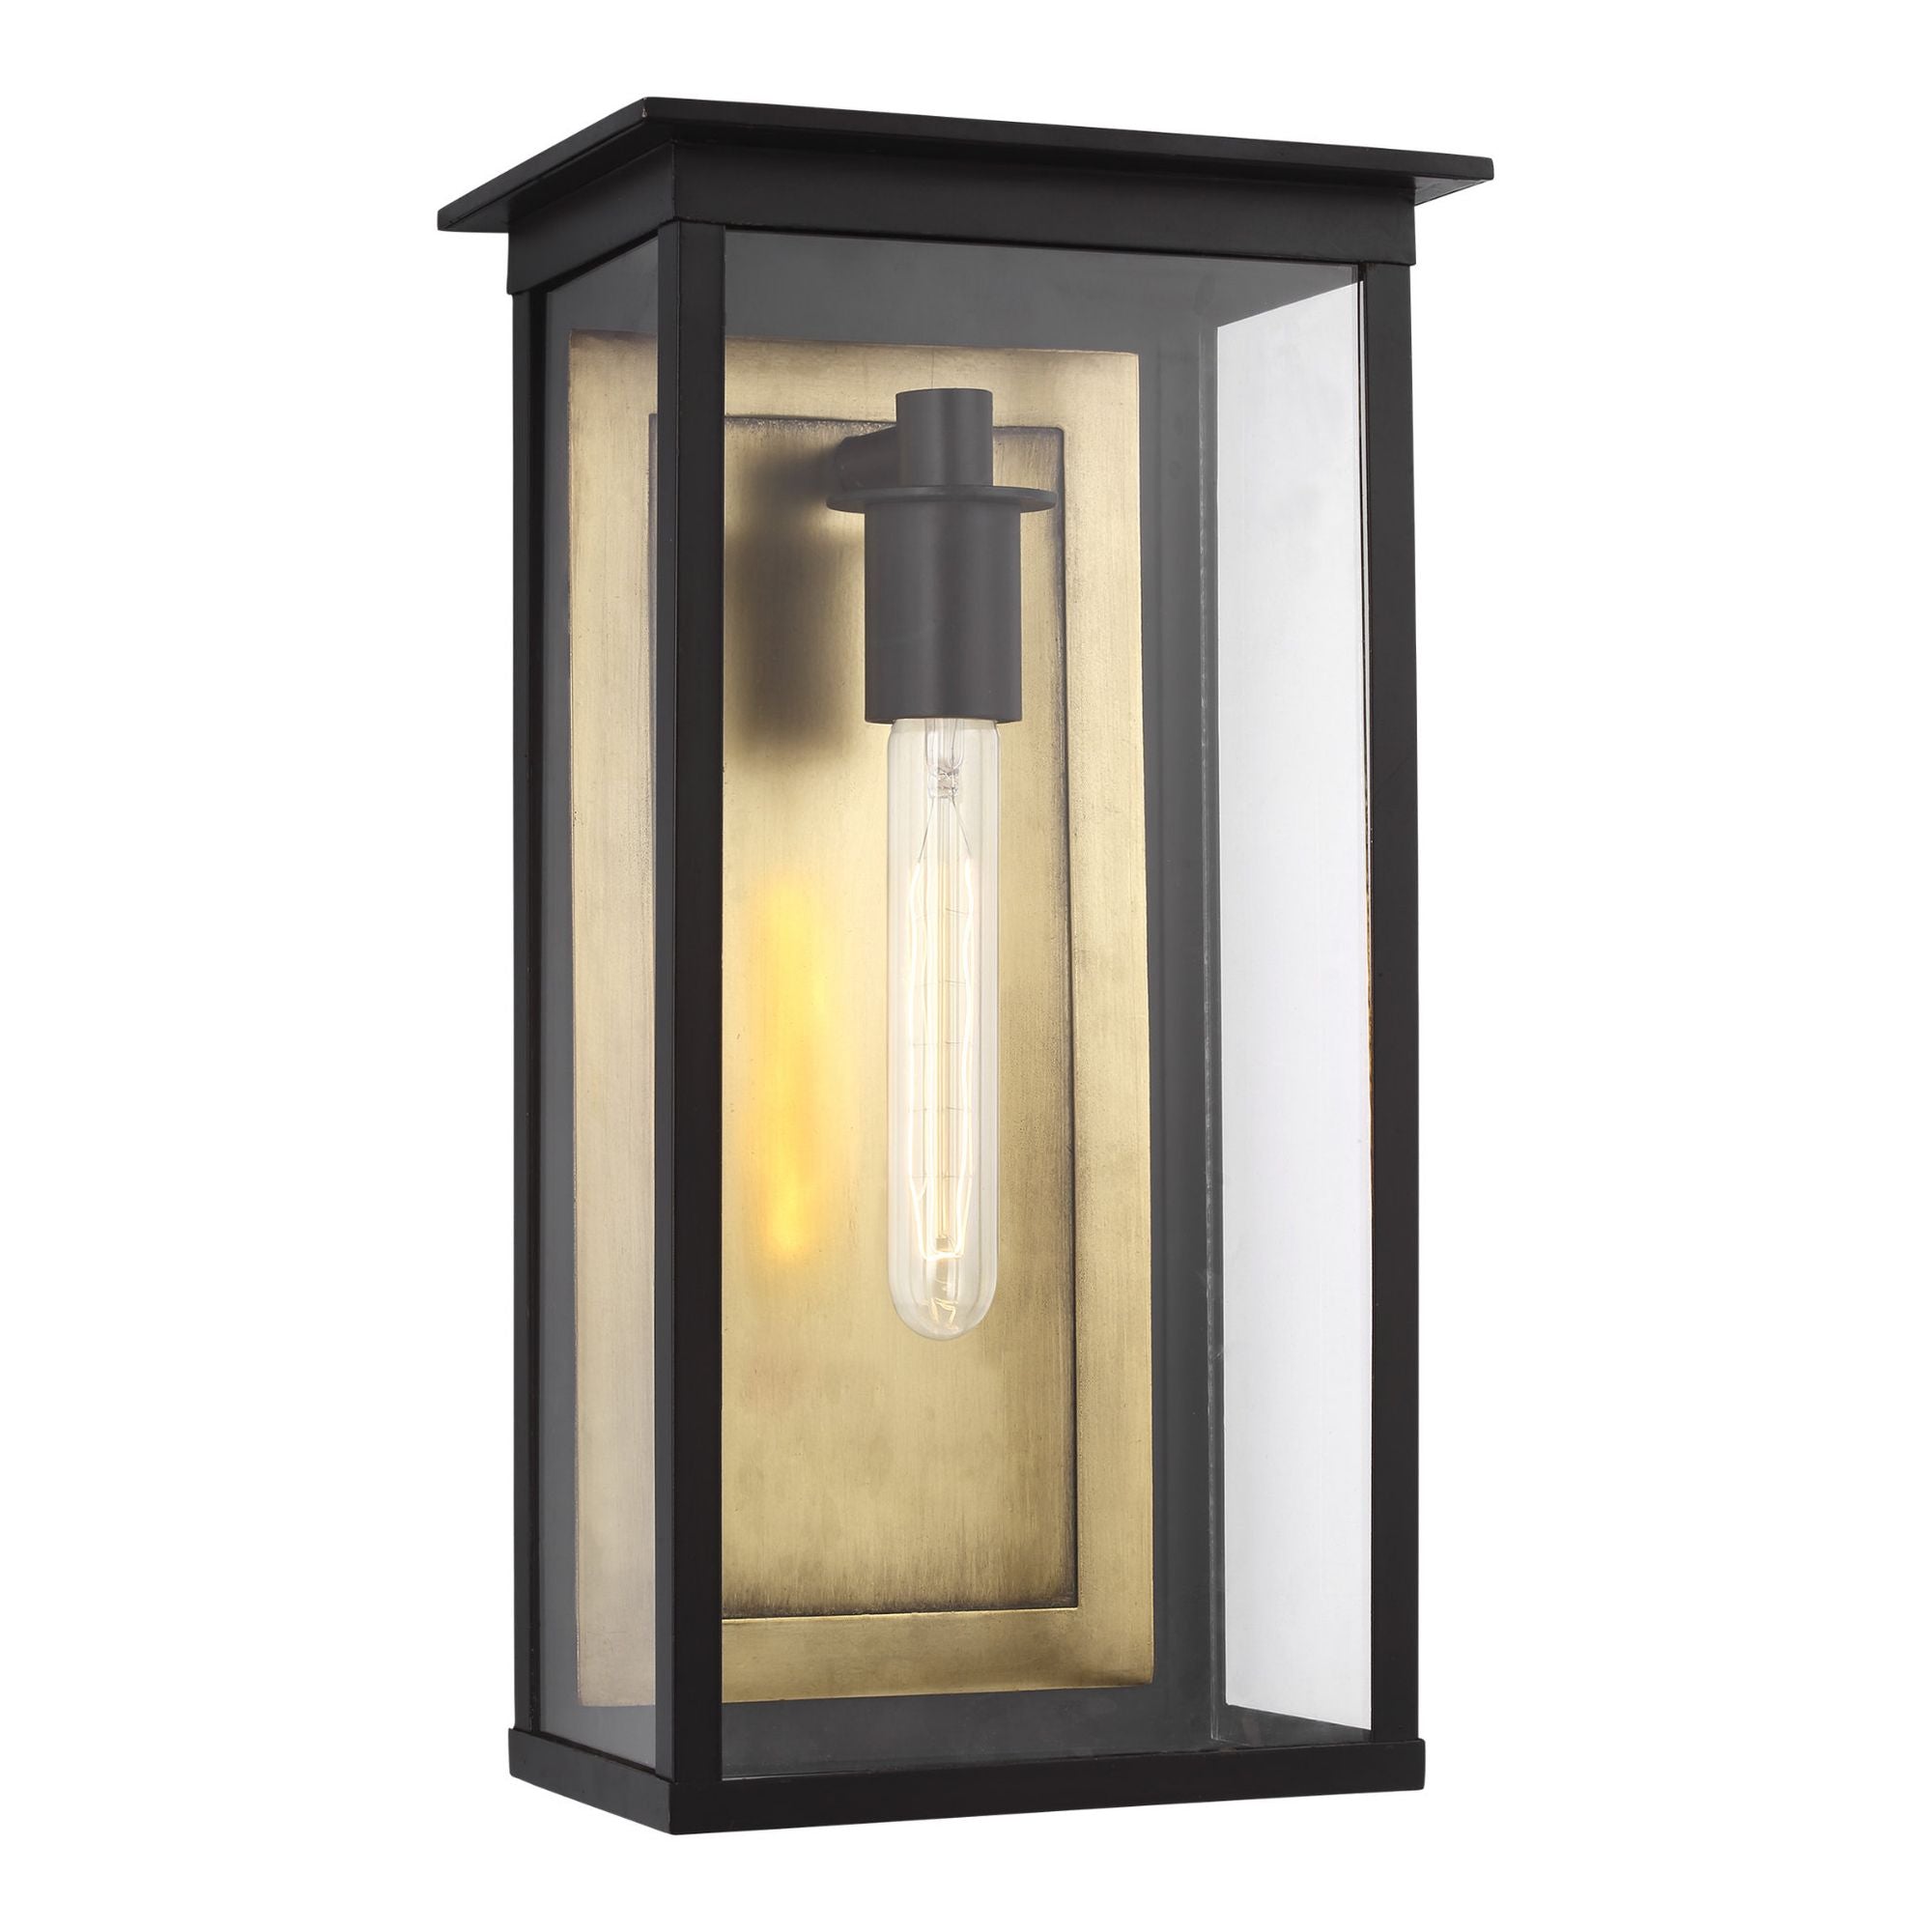 Chapman & Myers Freeport Large Outdoor Wall Lantern in Heritage Copper